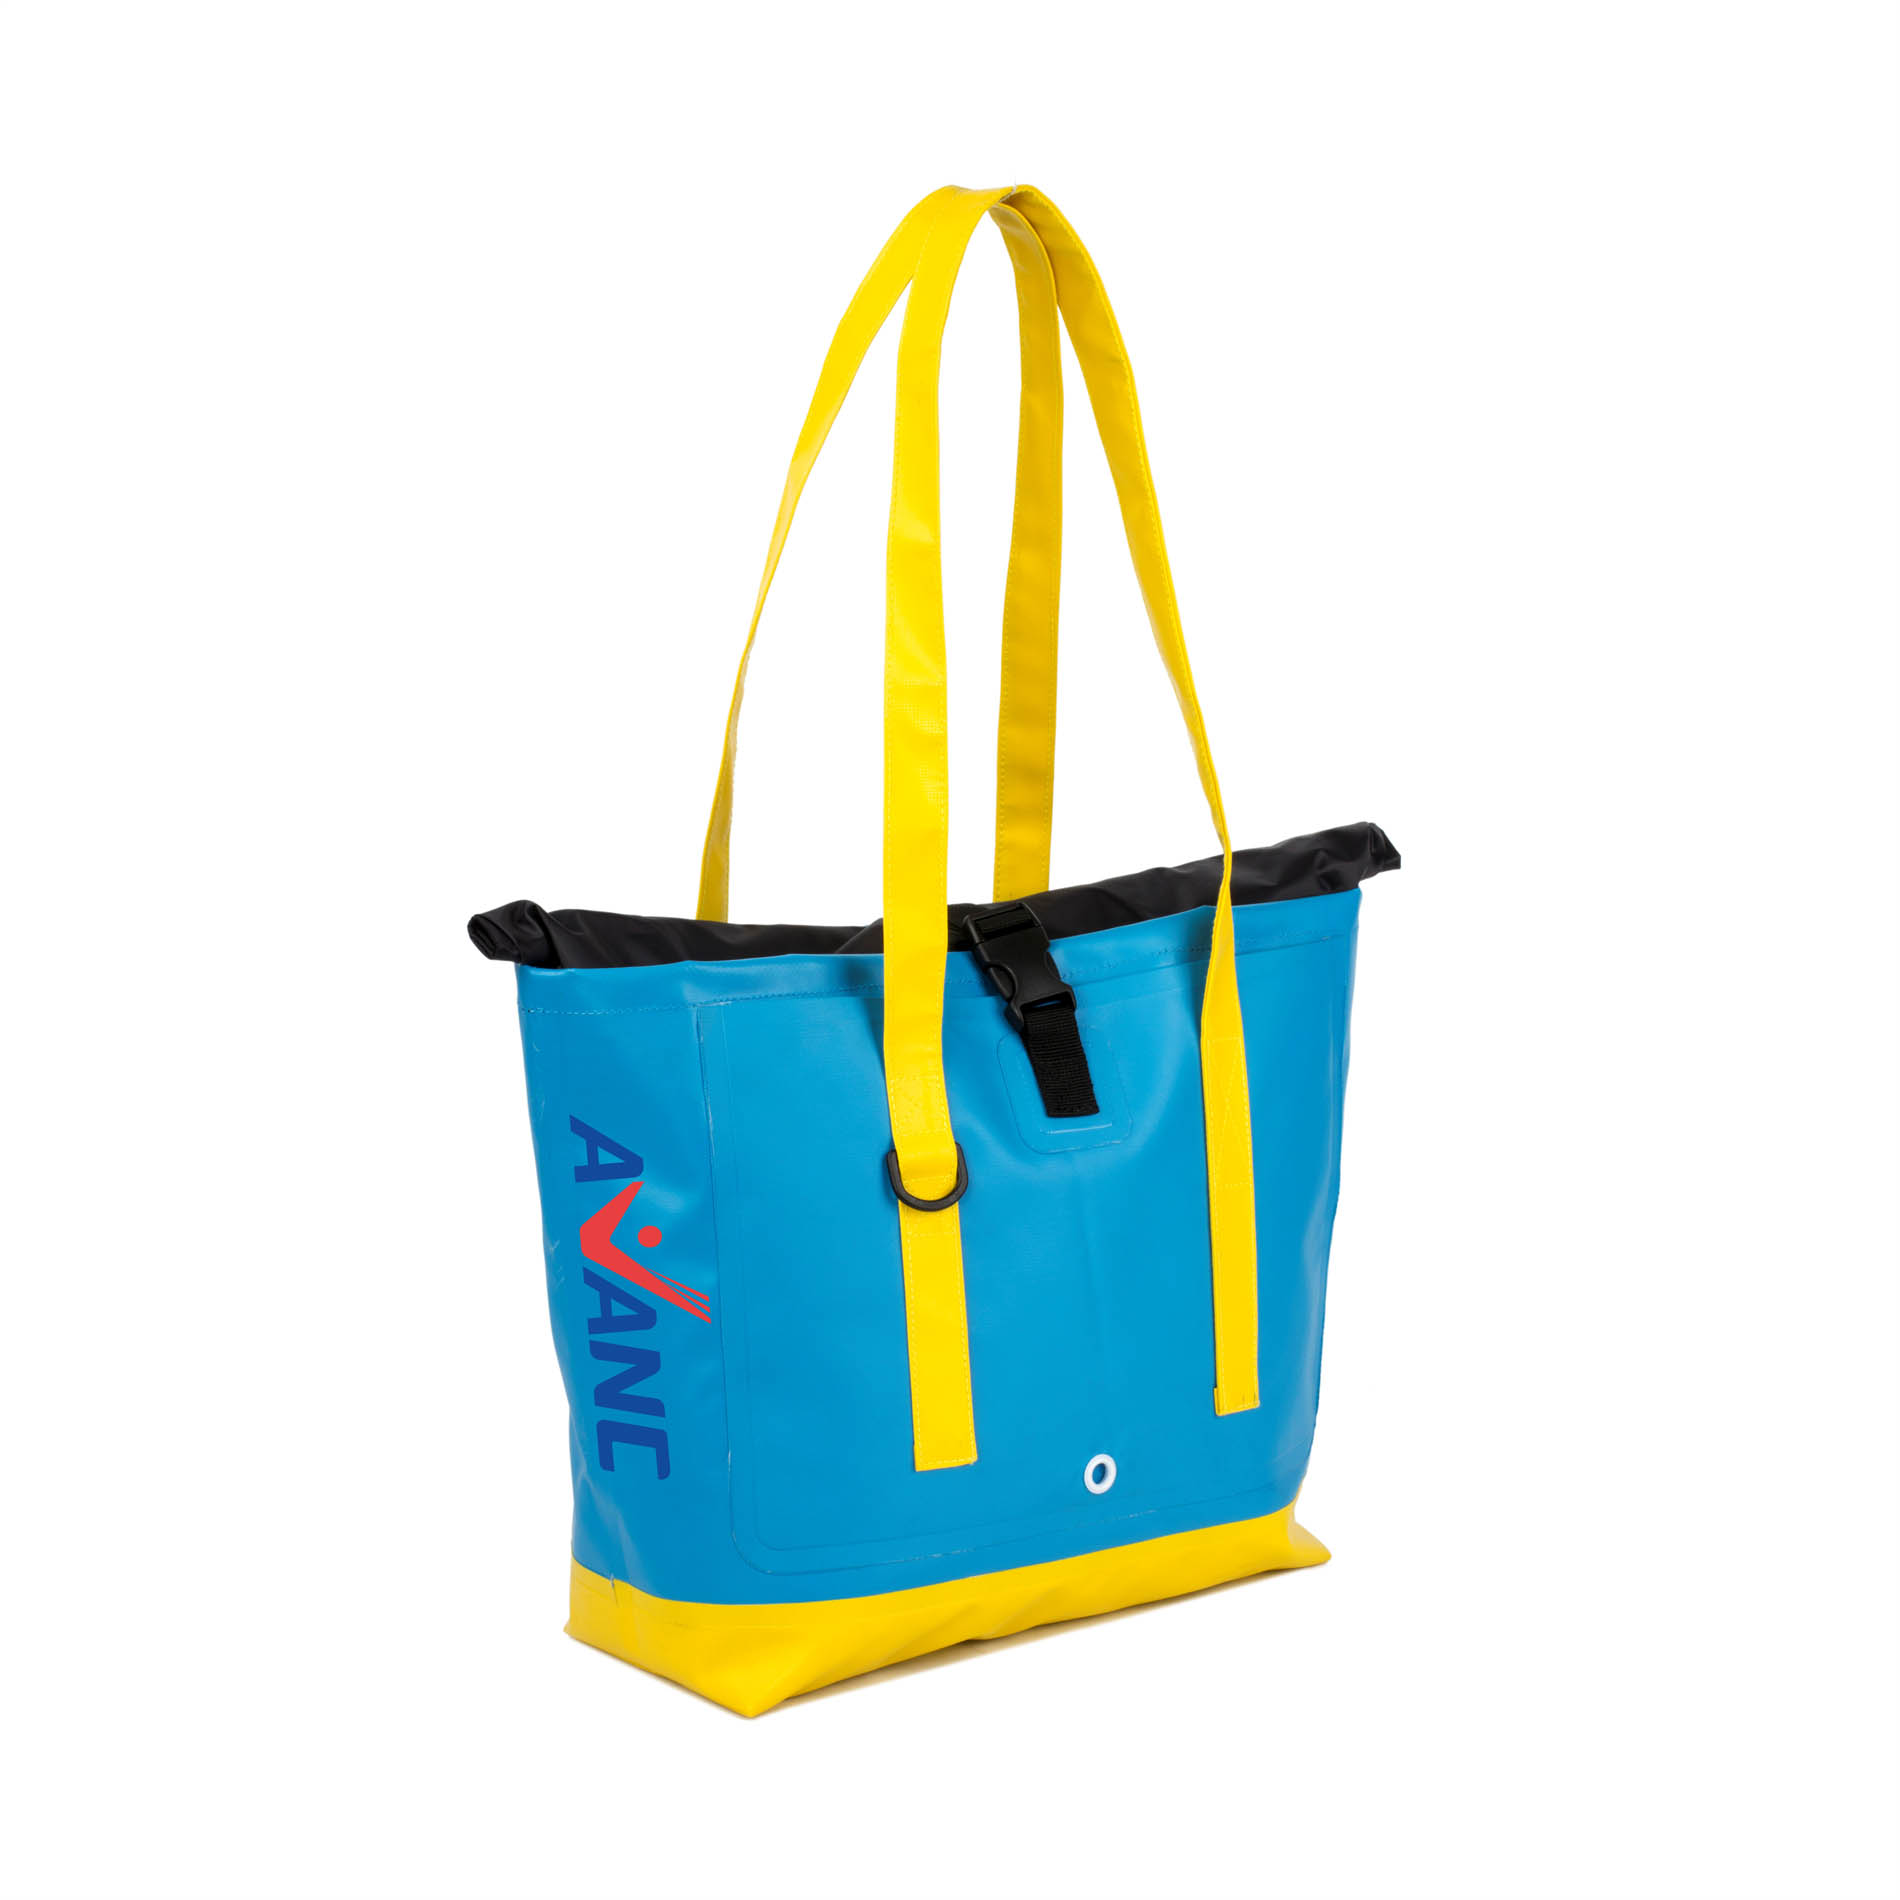 Wateproof Picinic Fashion Lunch Cooler Tote bag 15L